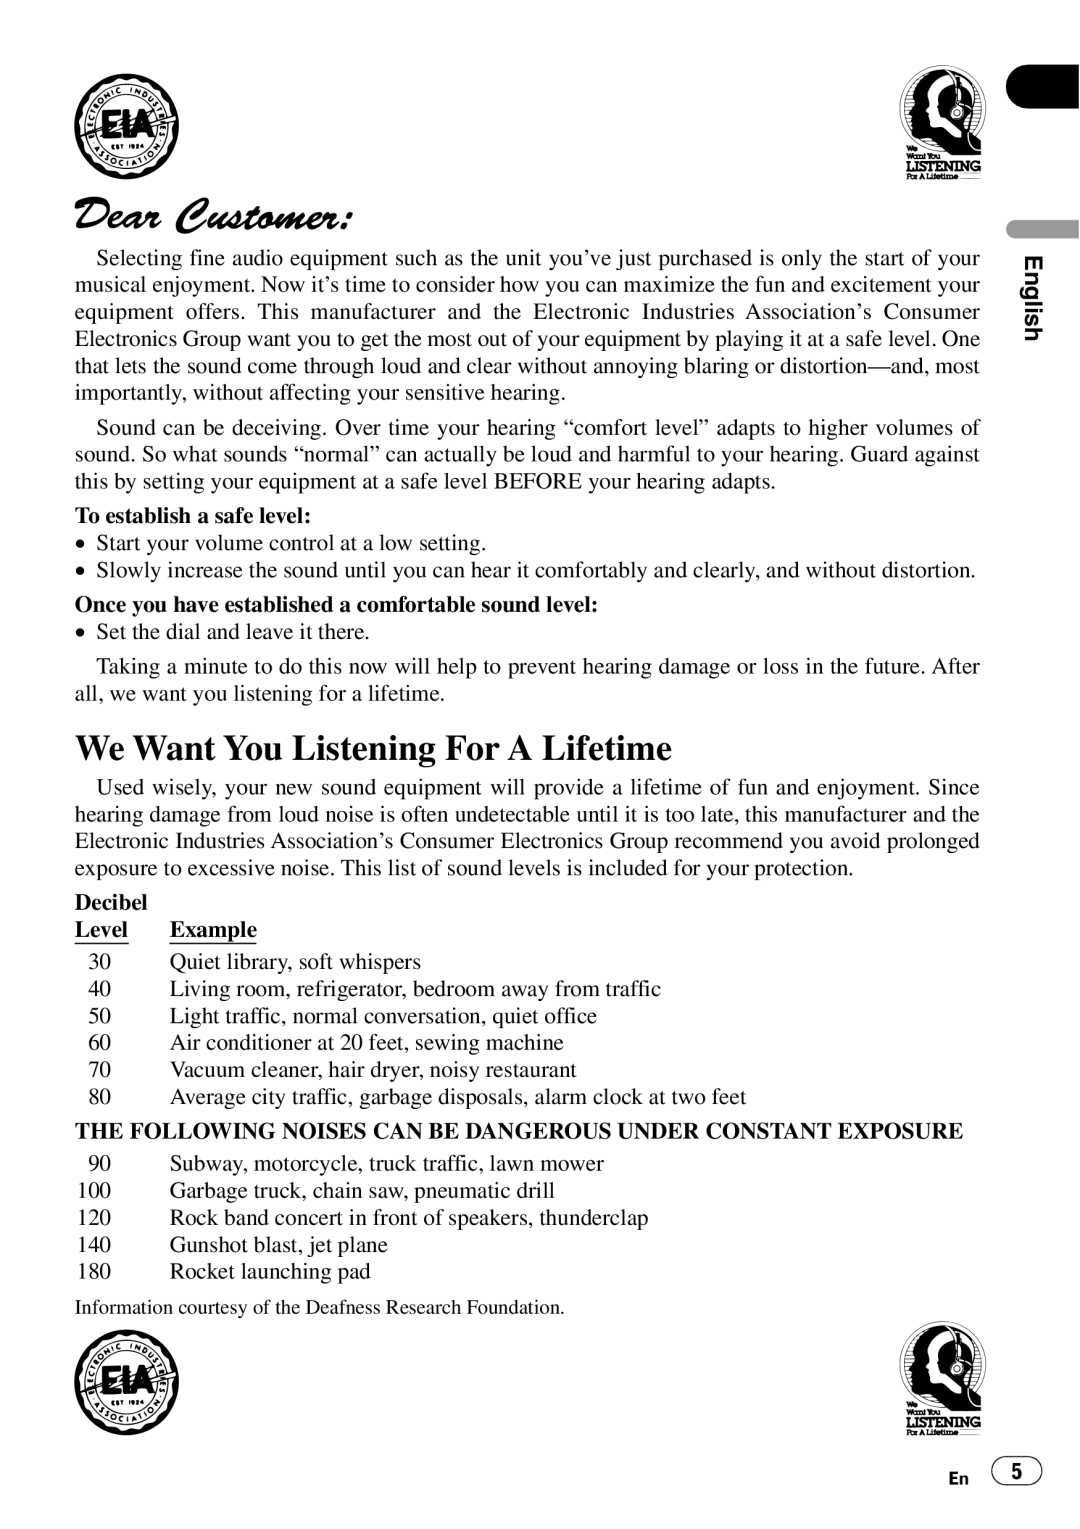 Pioneer DEH-P7700MP operation manual We Want You Listening For A Lifetime, To establish a safe level, Decibel Level Example 